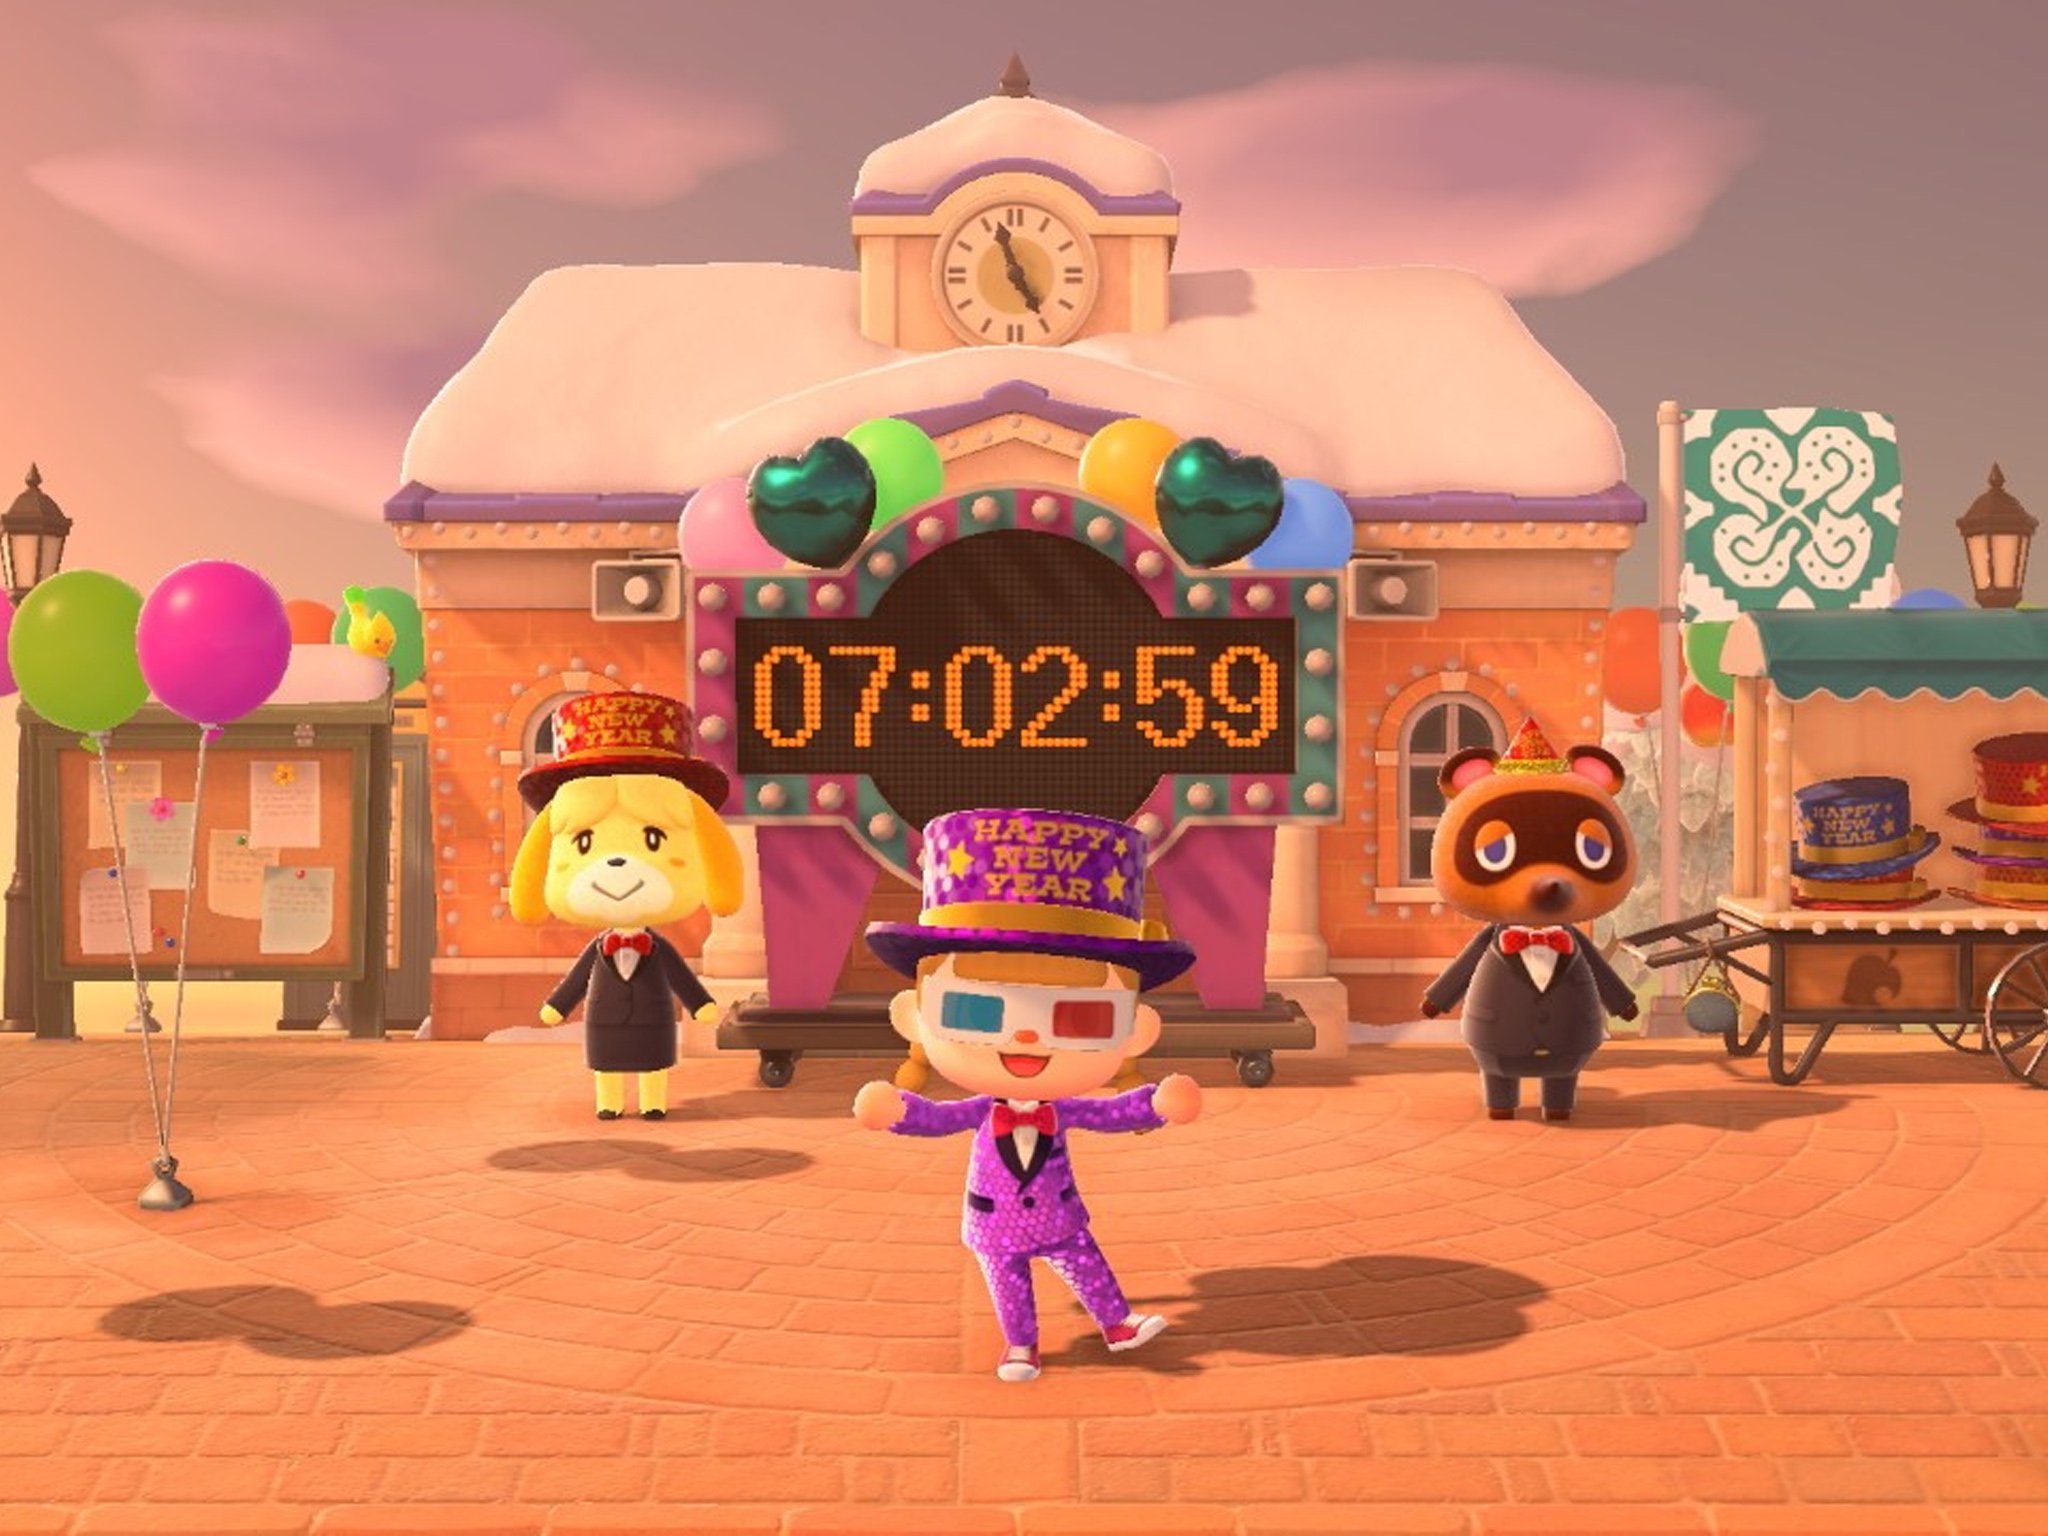 Animal Crossing New Horizons New Year's event — Fireworks, countdown